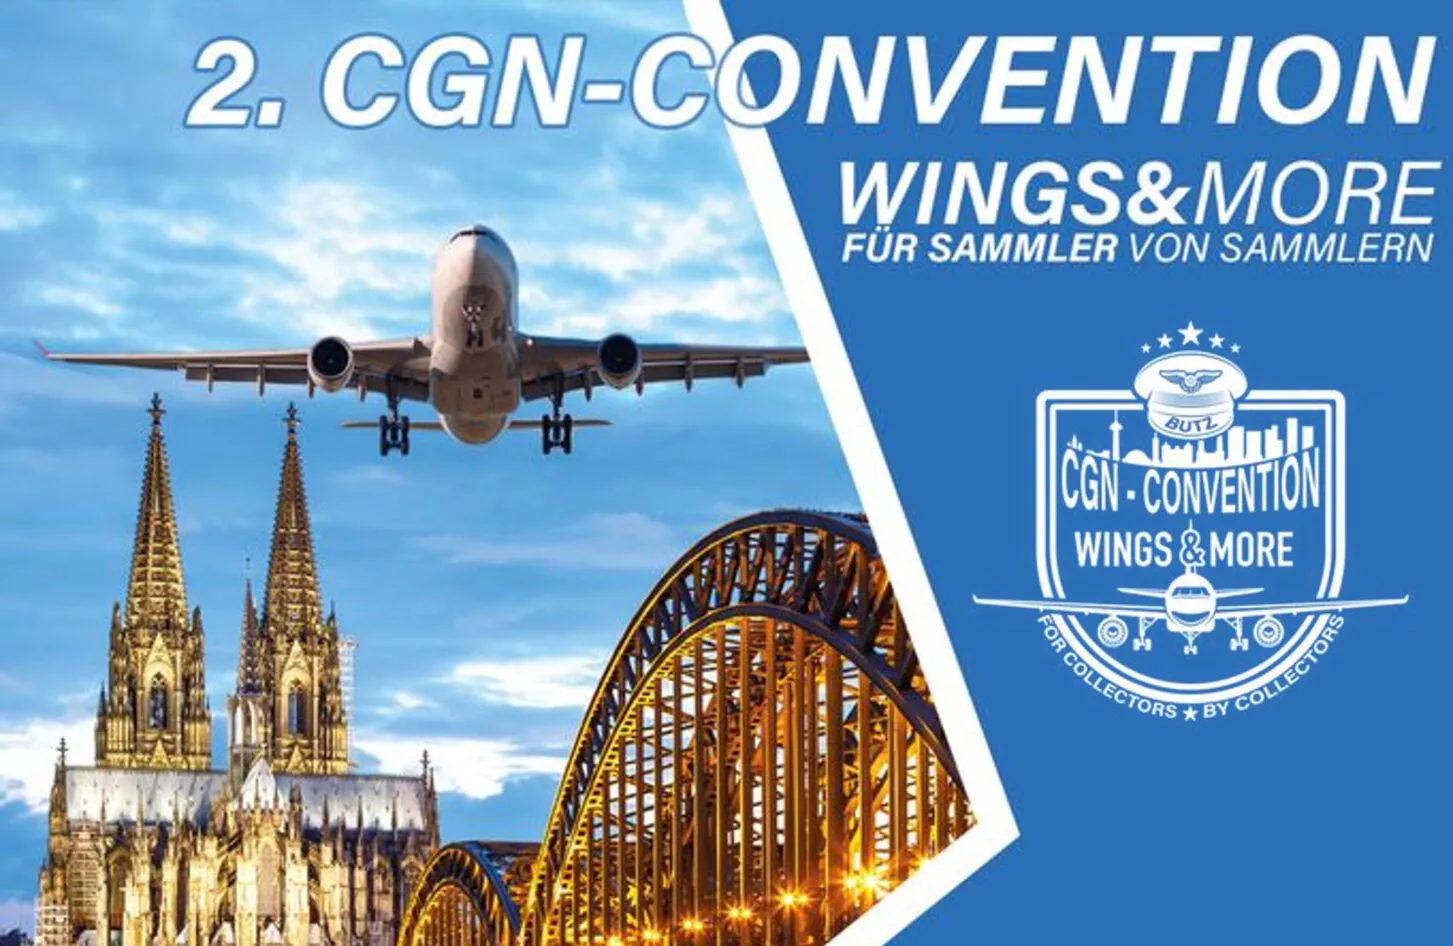 cgn convention jpg